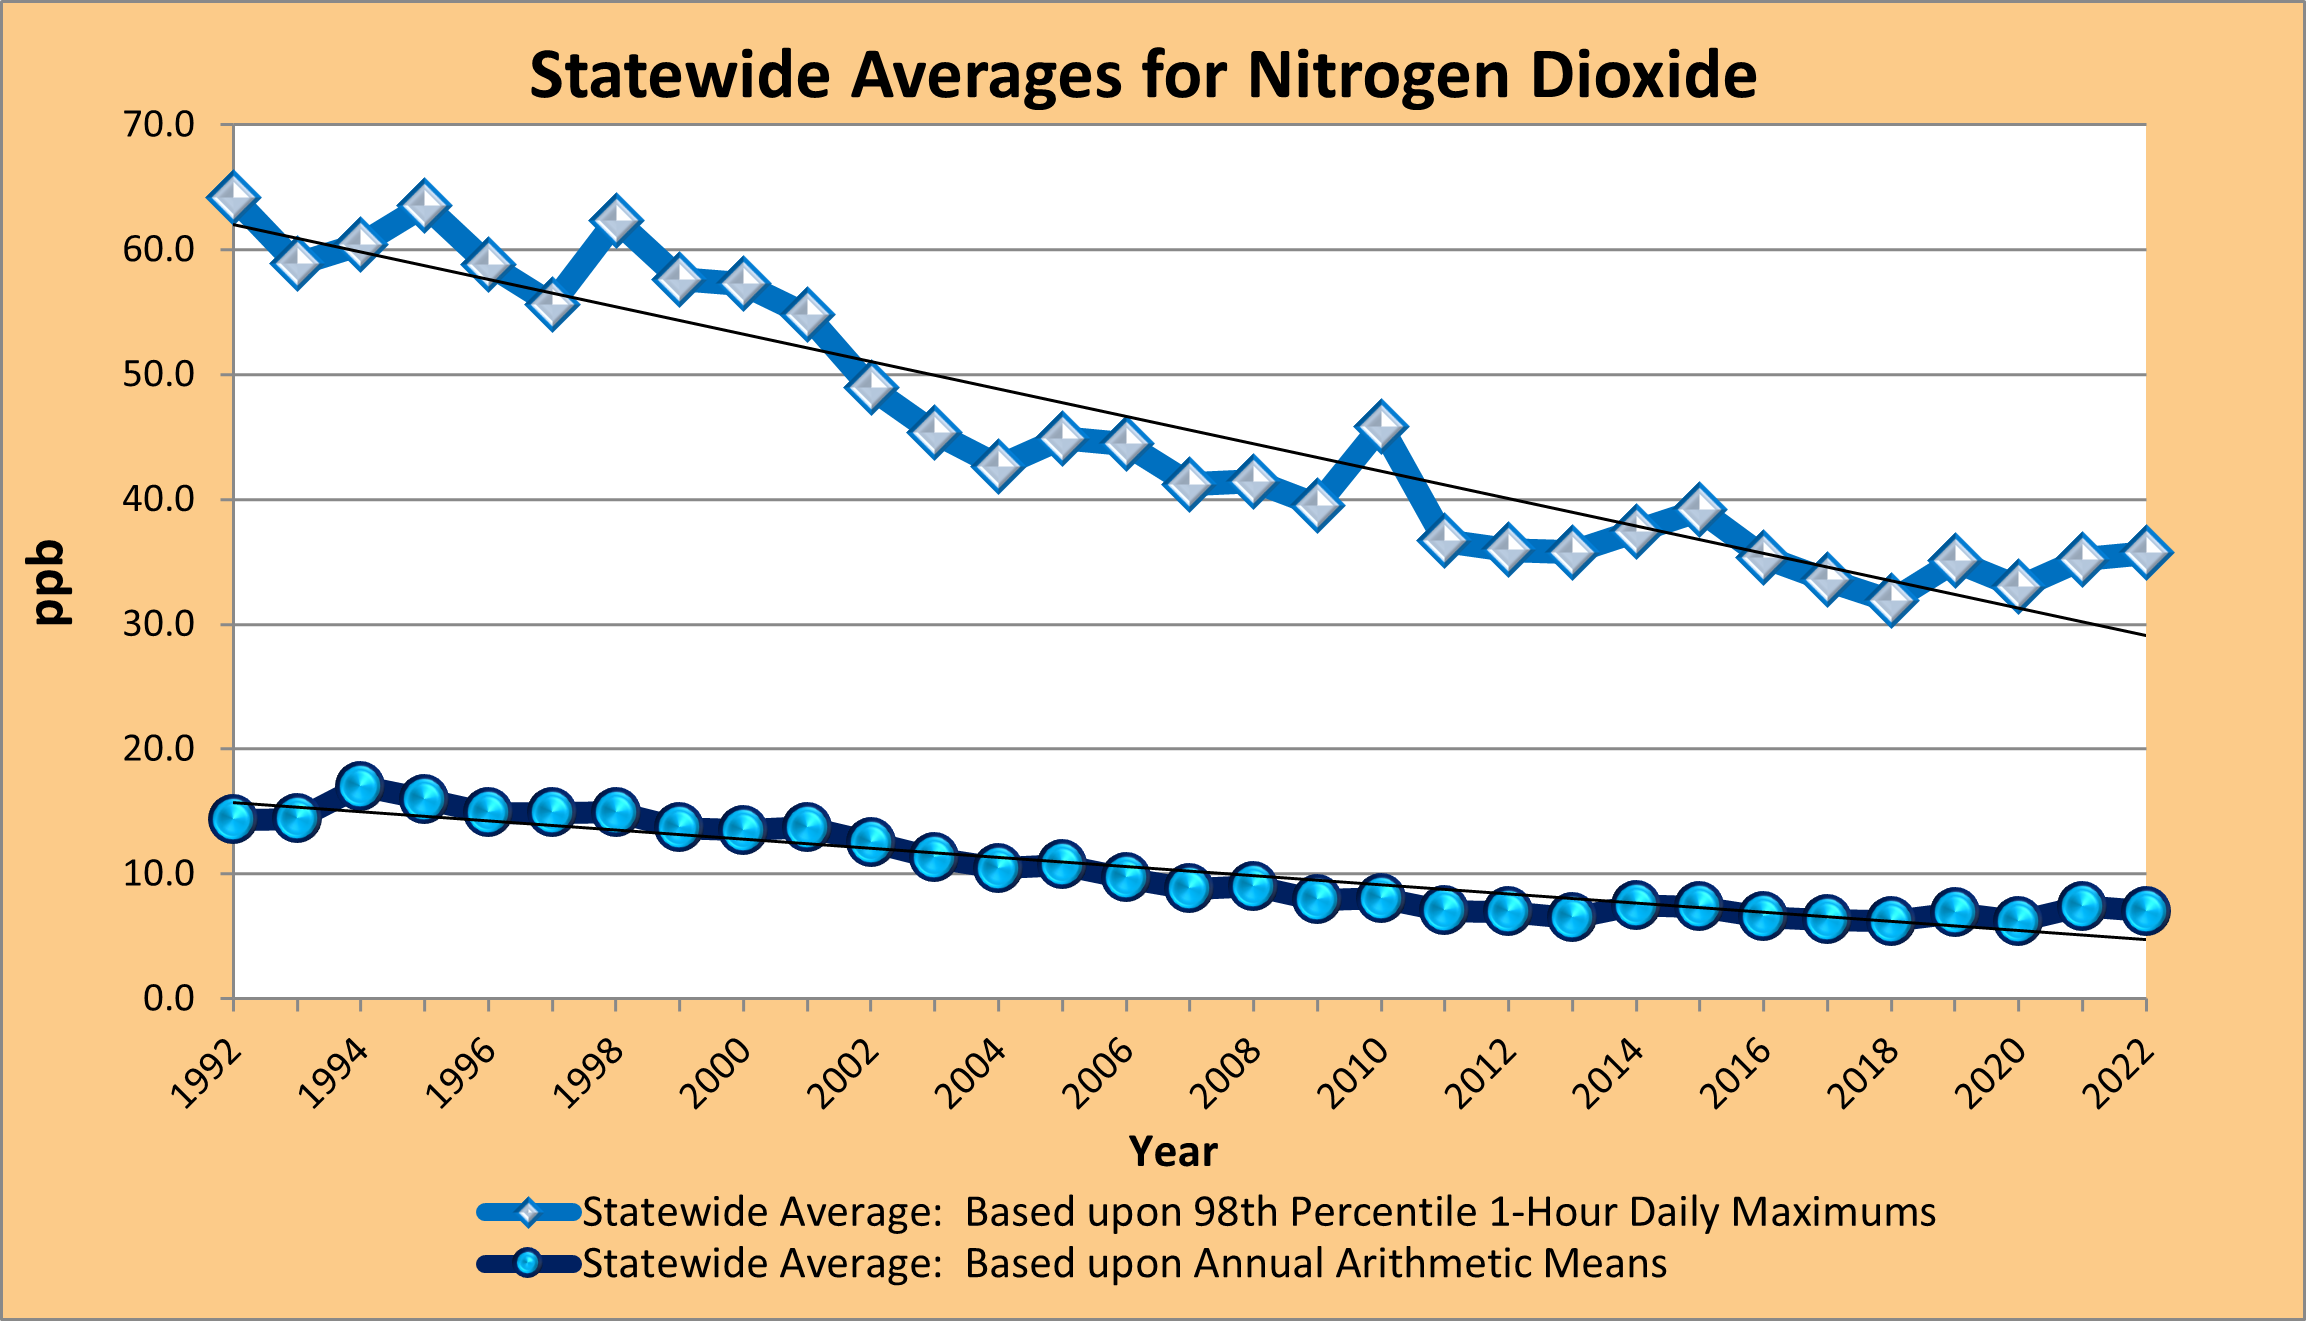 Ambient air monitoring data for notrogen dioxide averaged across the state.